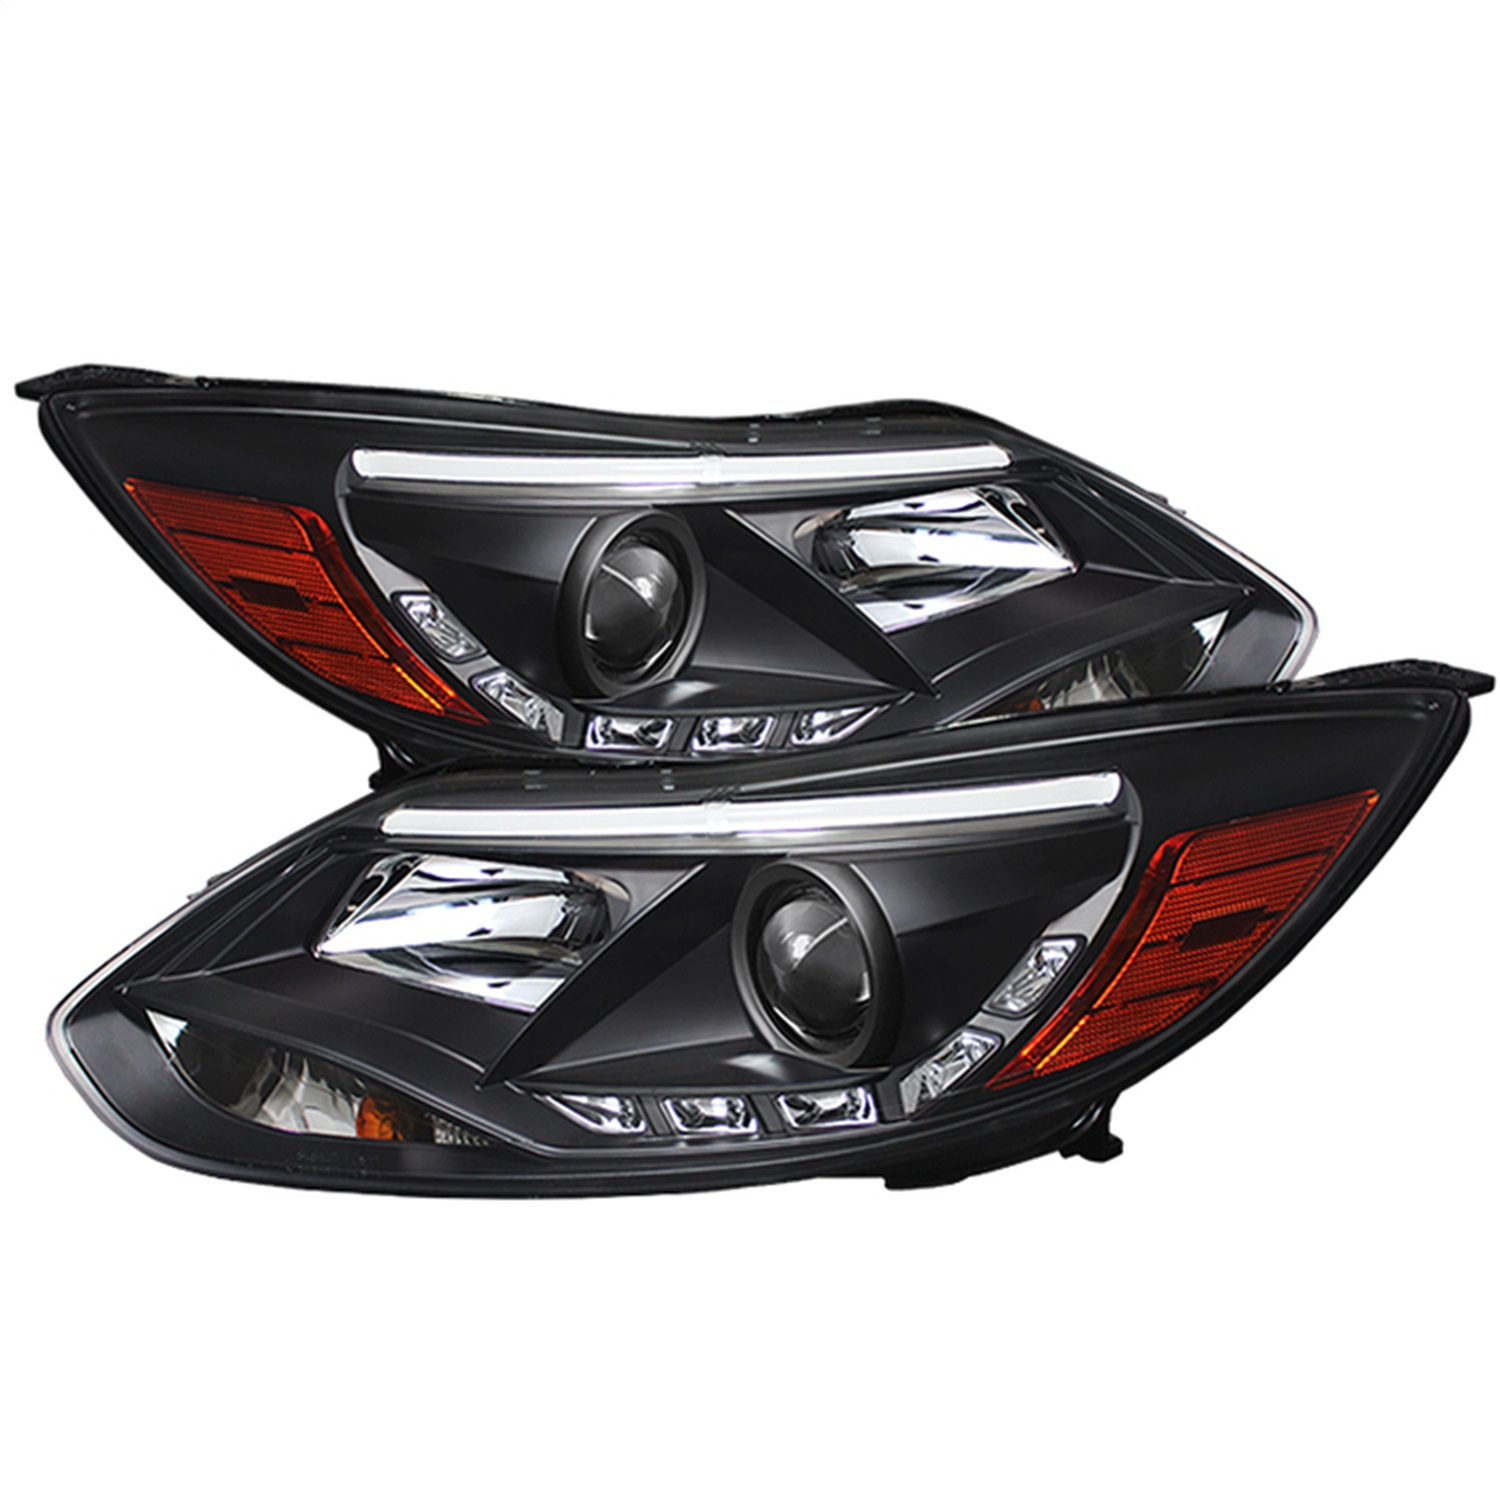 Spyder Auto 5072832 DRL LED Projector Headlights Fits 12-14 Focus